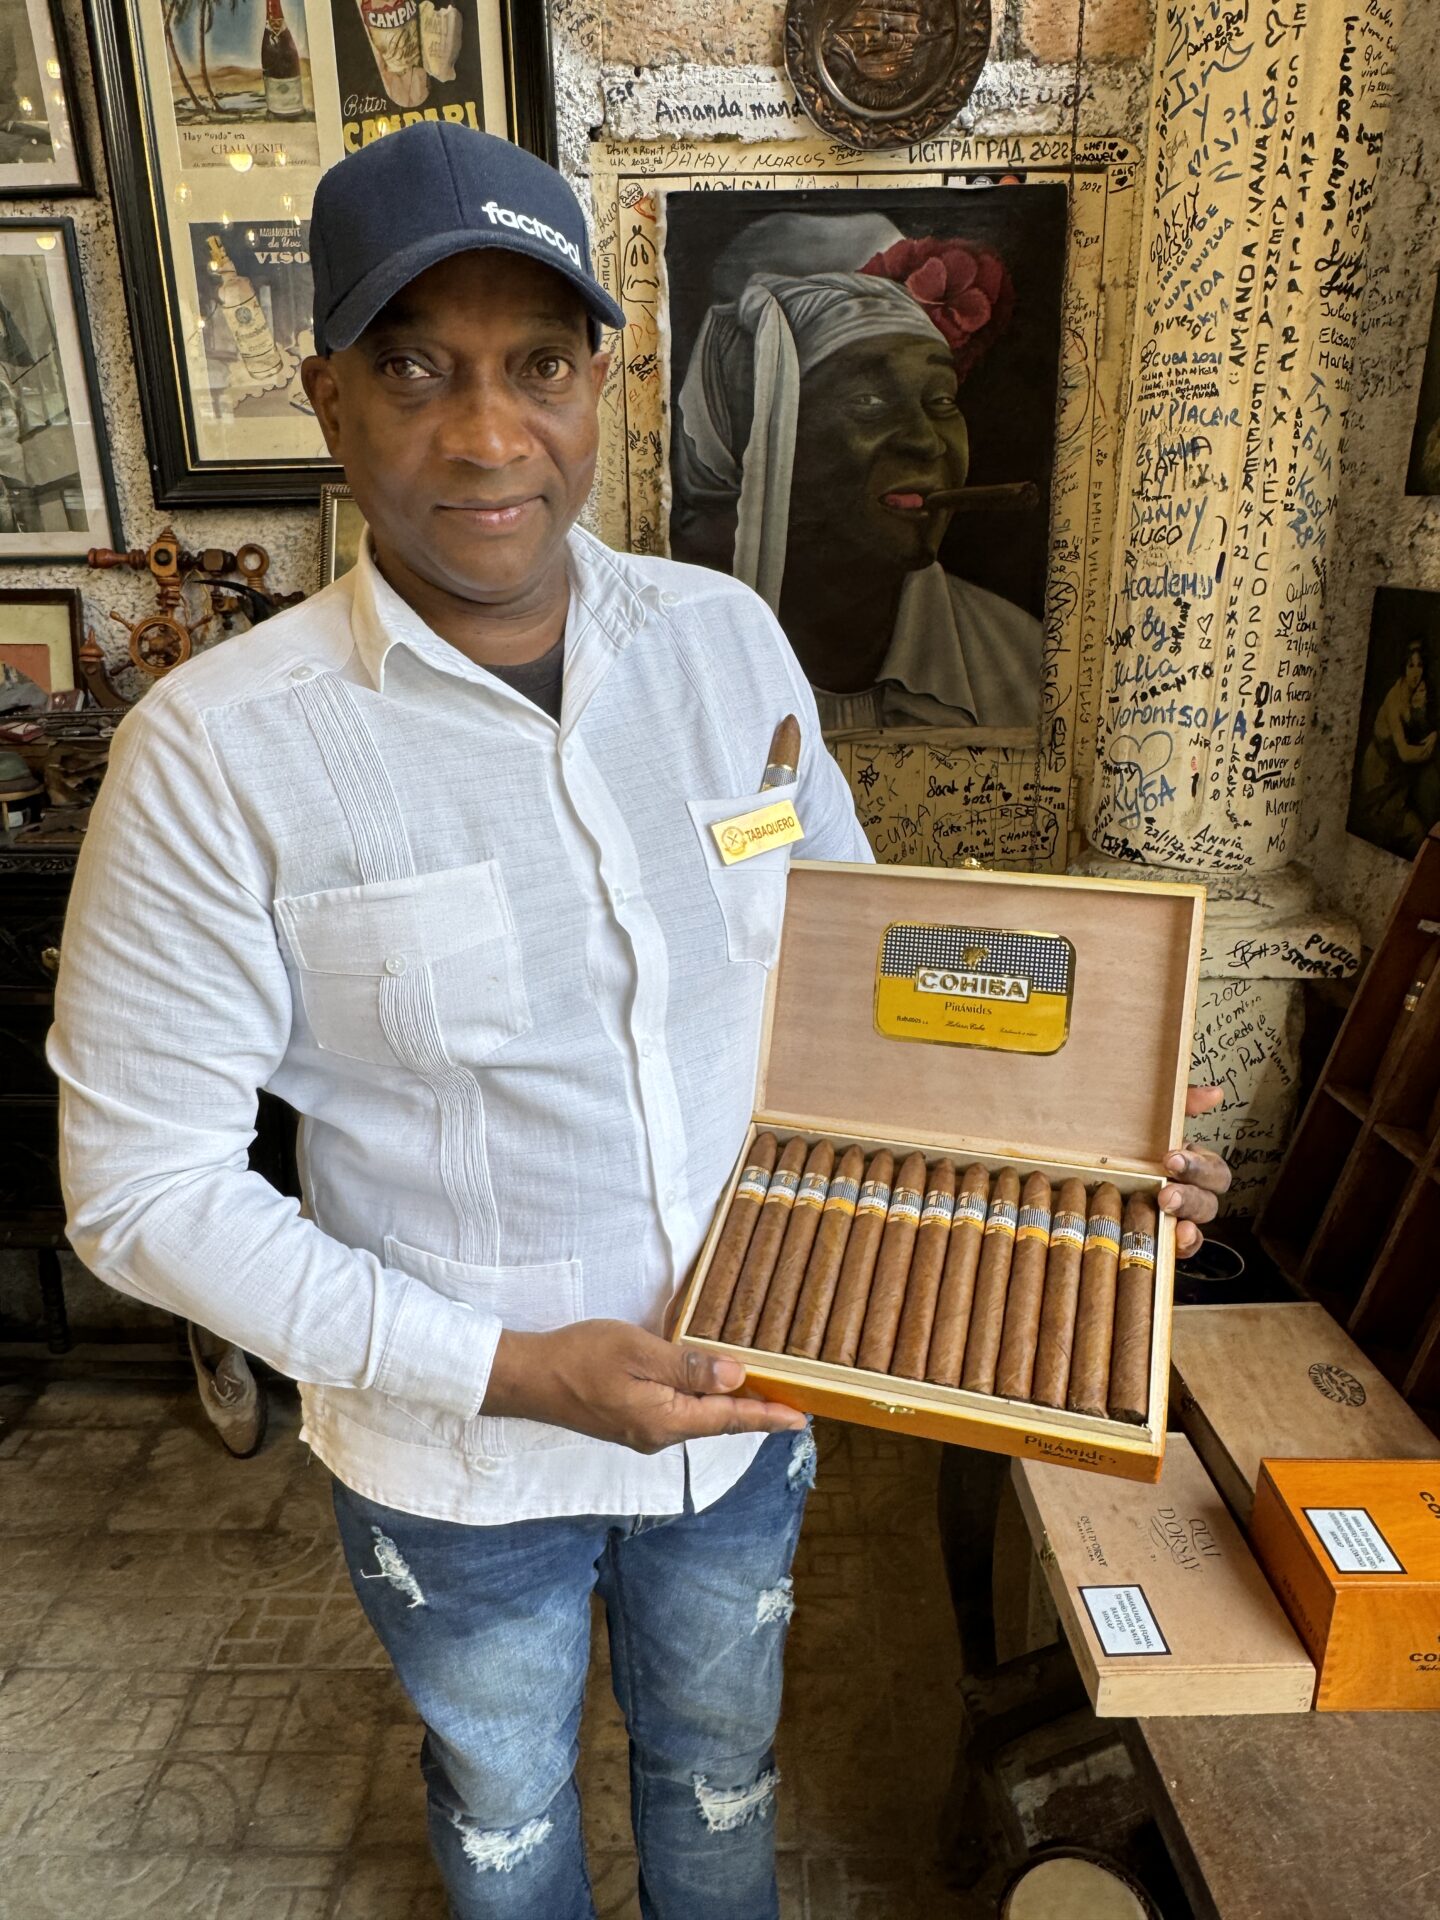 Tobacco expert from the pirate bar in Havana, Cuba, showing a box of Cohibas, as photographed by Carol Schiraldi of Carol's Little World. 